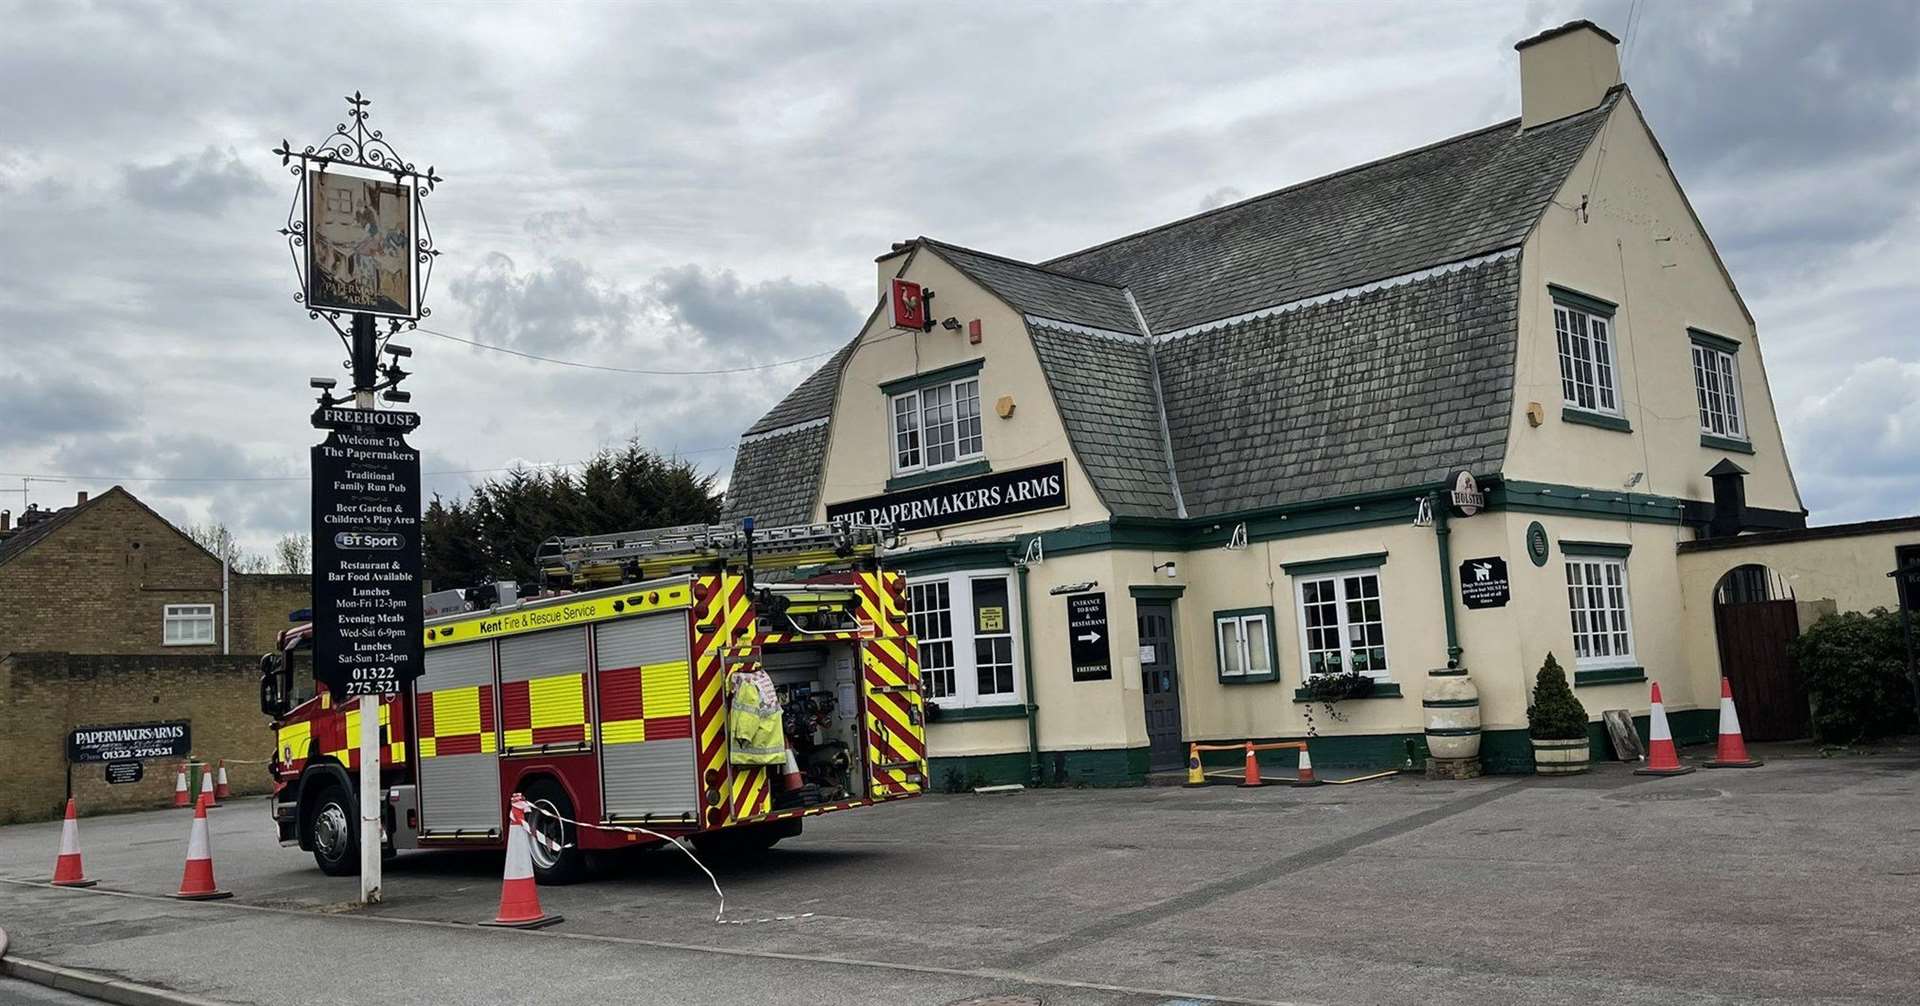 Crews have parked at The Papermakers Arms. Picture: UKNIP